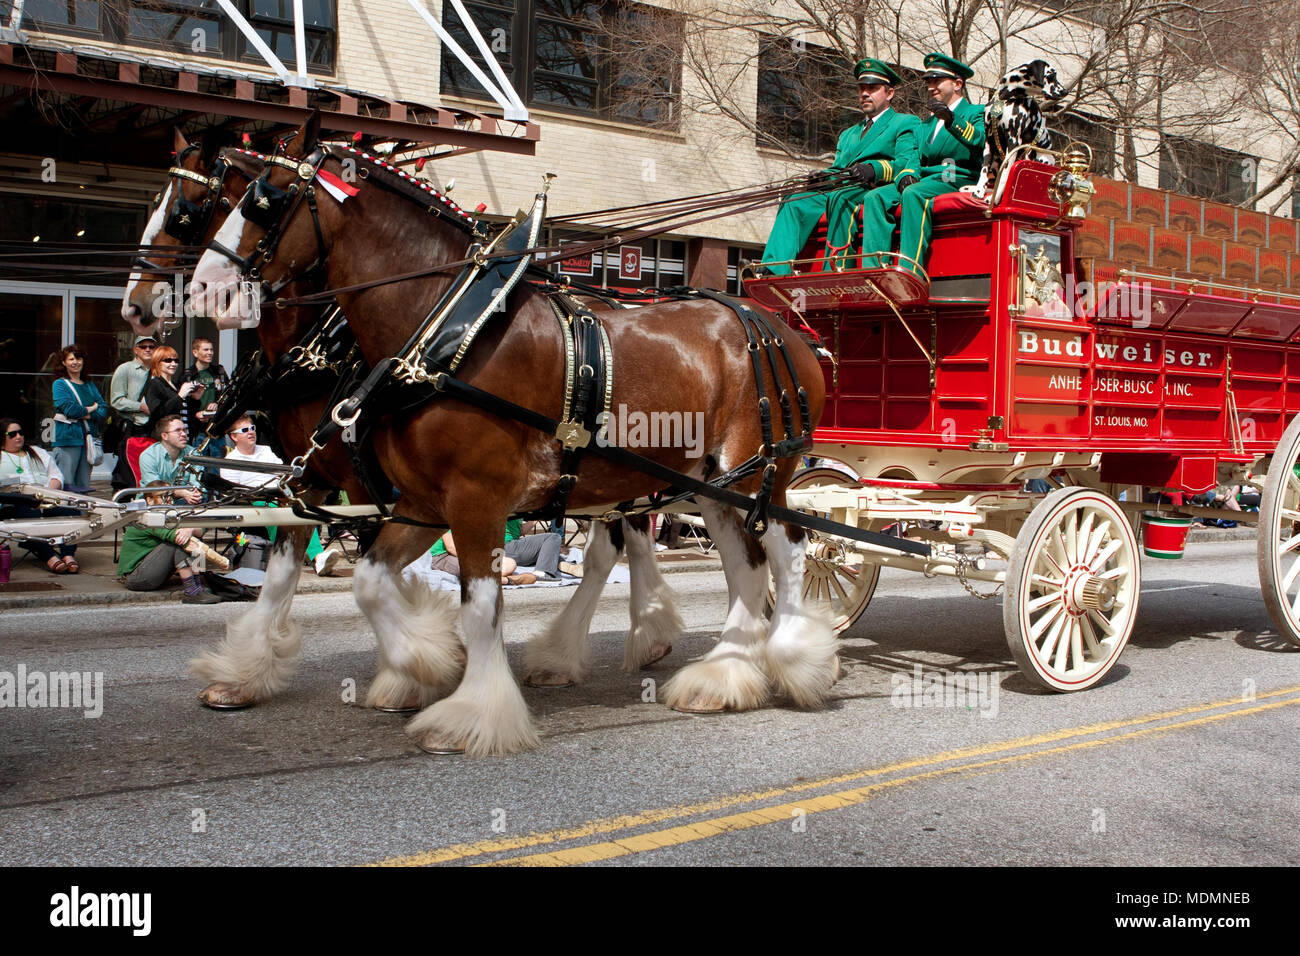 Clydesdales Stock Photos &amp; Clydesdales Stock Images - Alamy